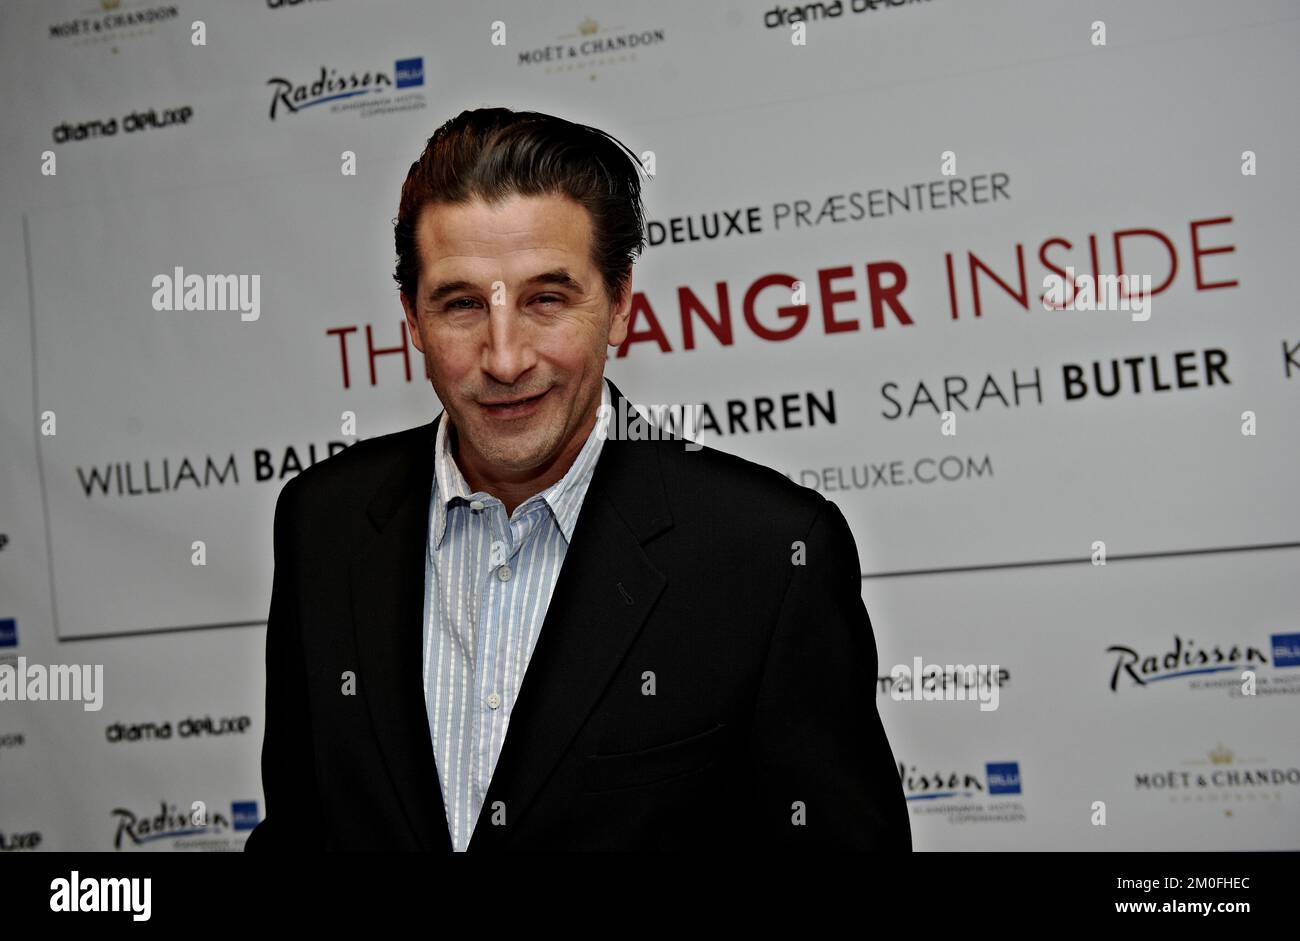 American actor William Baldwin performs in the new Danish thriller 'The Stranger Inside.' The rest of the team consists of Estella Warren, Sarah Butler and Kim bodnia from Denmark. The movie is being shoot in Mallorca and Denmark and is directed and produced by Adam Neutzsky-Wulff and Michael Aoun. The team held a press-meeting in Copenhagen Monday January 9th. In pic. William Baldwin. PHOTOGRAPHER TARIQ MIKKEL KHAN / POLFOTO Stock Photo